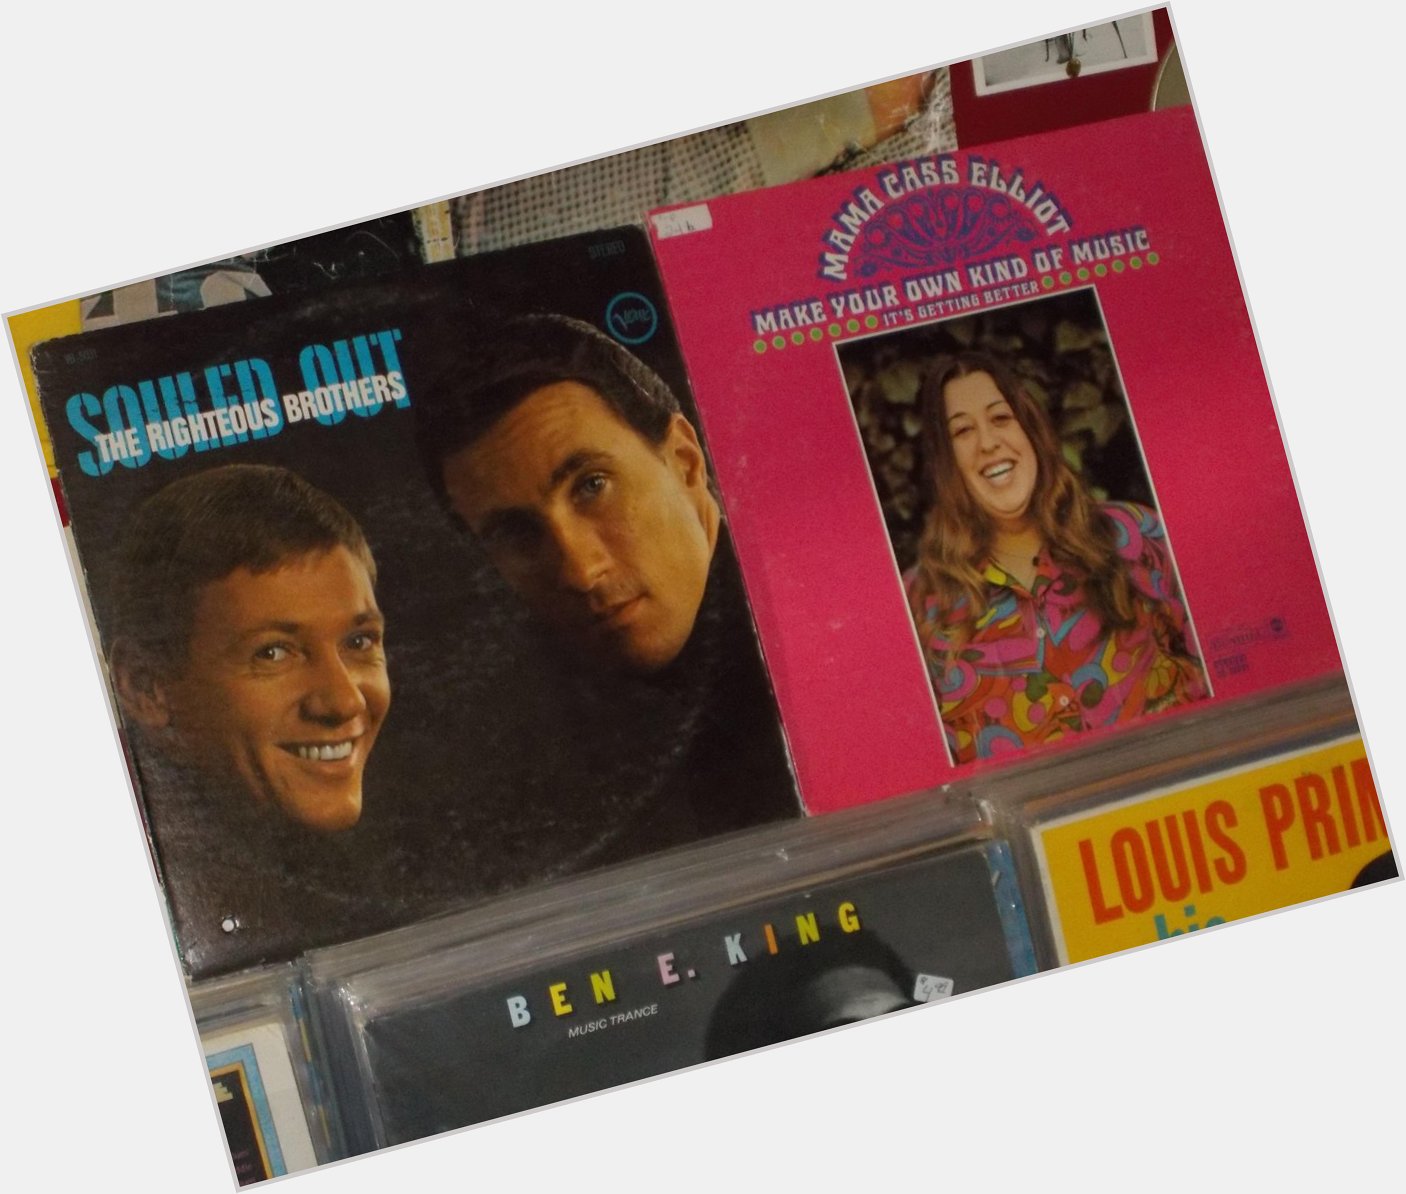 Happy Birthday to Bill Medley of the Righteous Brothers and the late Mama Cass 